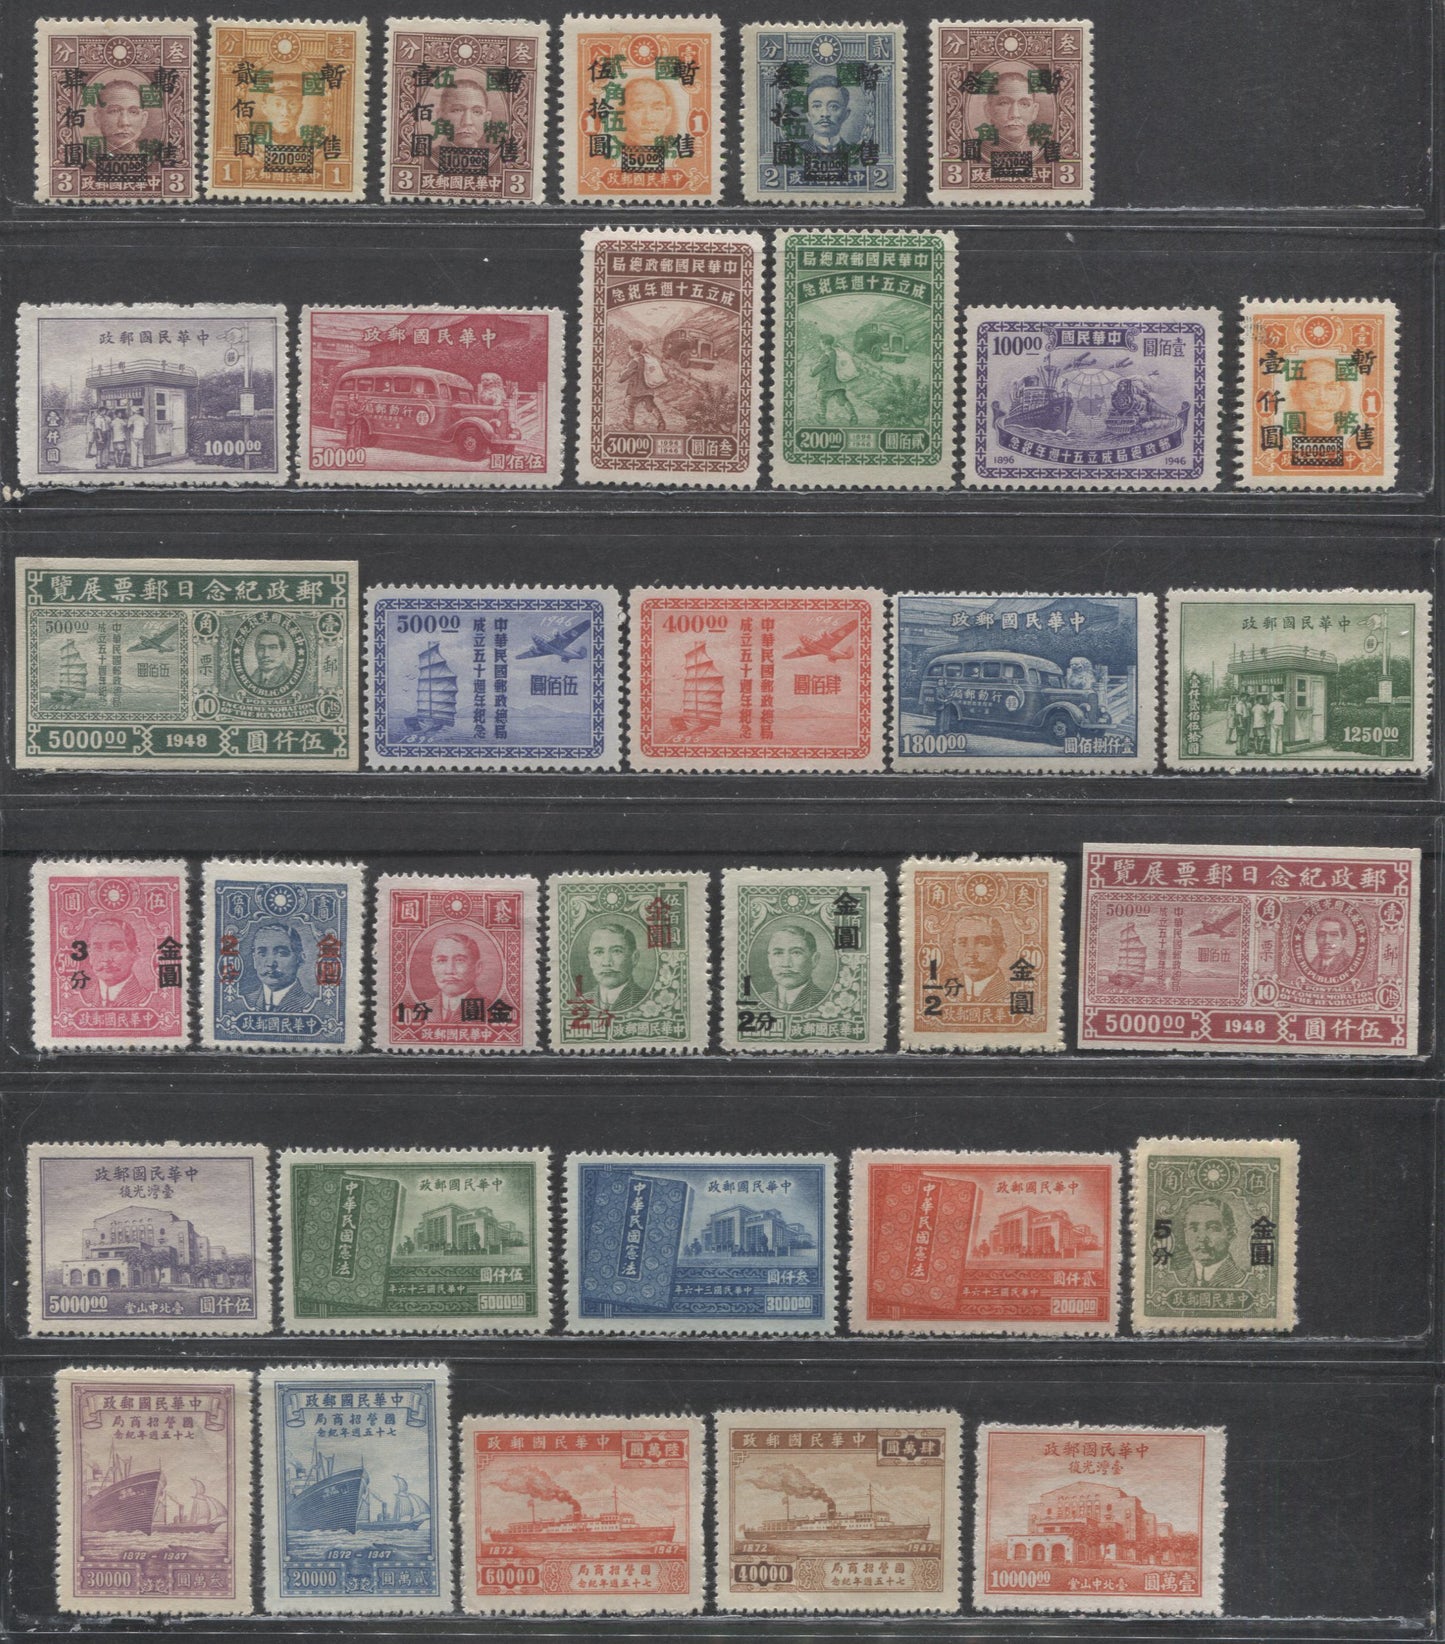 Lot 437 China SC#615/827 1945-1948 Surcharges & Commemoratives, 38 F/VFUN (No Gum As Issued) & OG Singles, Click on Listing to See ALL Pictures, 2017 Scott Cat. $12.5 USD